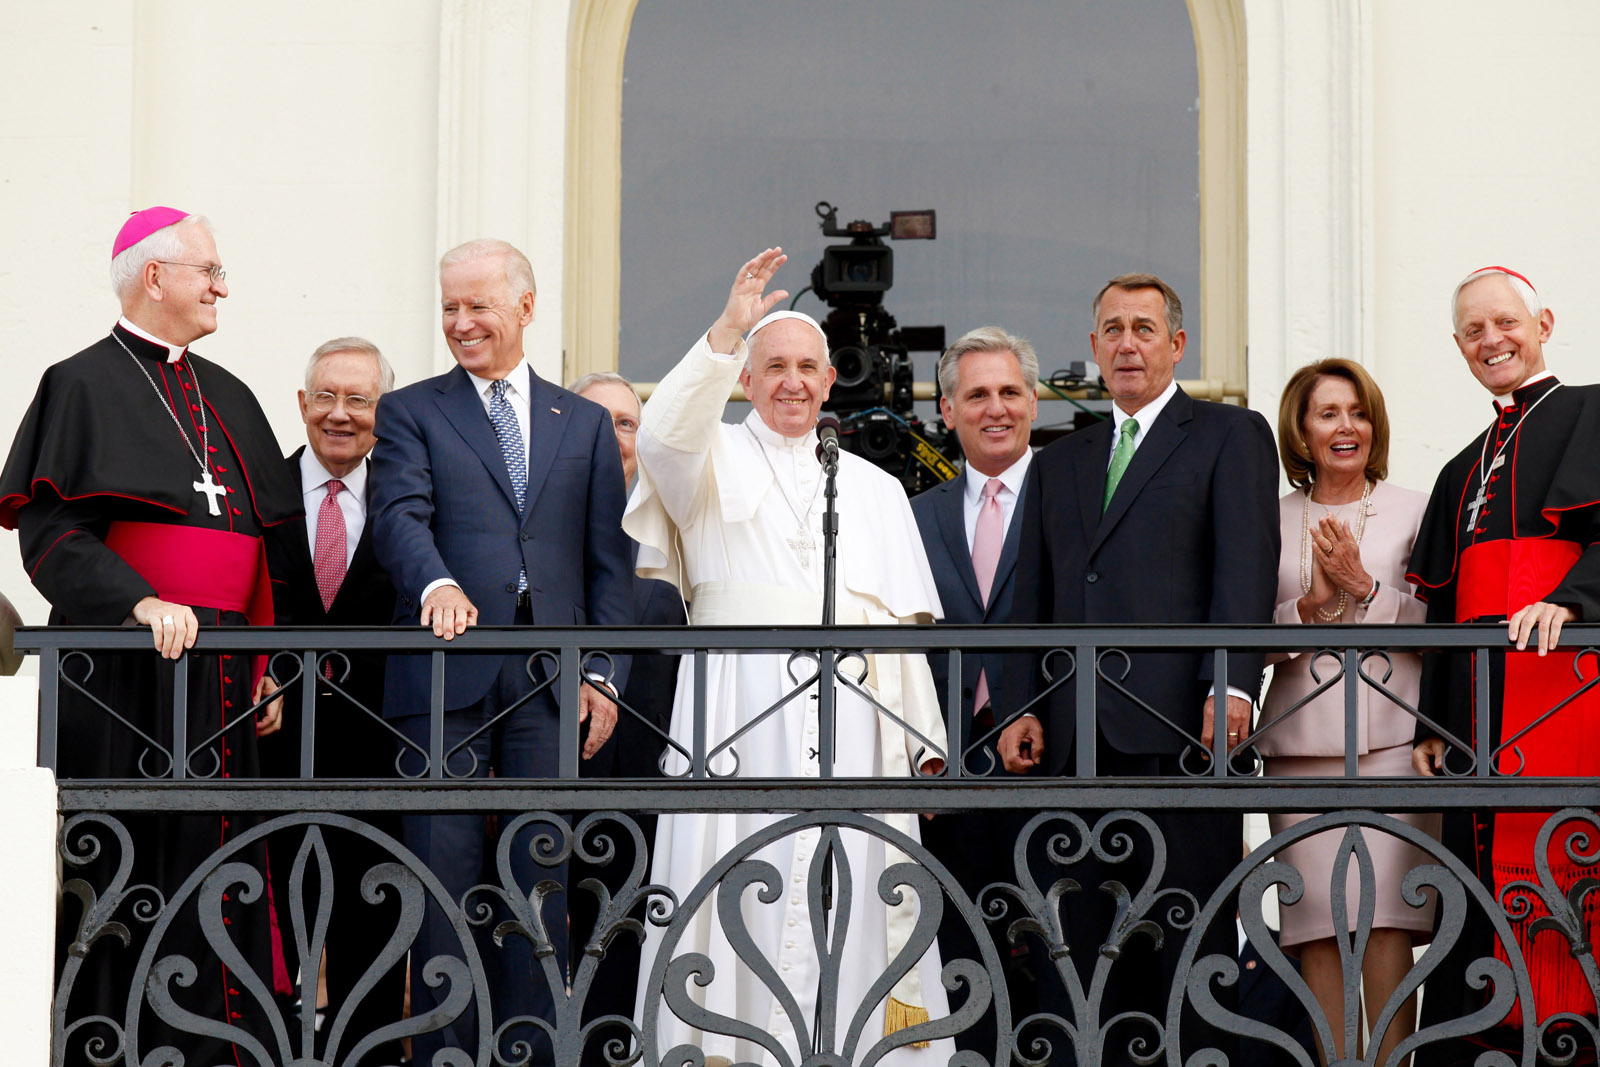 WASHINGTON, DC - SEPTEMBER 24:  Pope Francis waves to crowd from the balcony of the US Capitol building, after his address to a joint meeting of the U.S. Congress as (L to R) Arch Bishop Joseph E. Kurtz,  Senate Minority Leader Harry Reid (D-NV), Vice President Joe Biden, House Majority Leader Kevin McCarthy (R-CA), Speaker of the House John Boehner (R-OH), House Democratic Leader Rep. Nancy Pelosi (D-CA) and Cardinal Donald Wuerl look on September 24, 2015 in Washington, D.C. Pope Francis, the first pope to address a joint meeting of Congress, will finish his tour of Washington later today before traveling to New York City.  (Photo by Evy Mages/Getty Images)